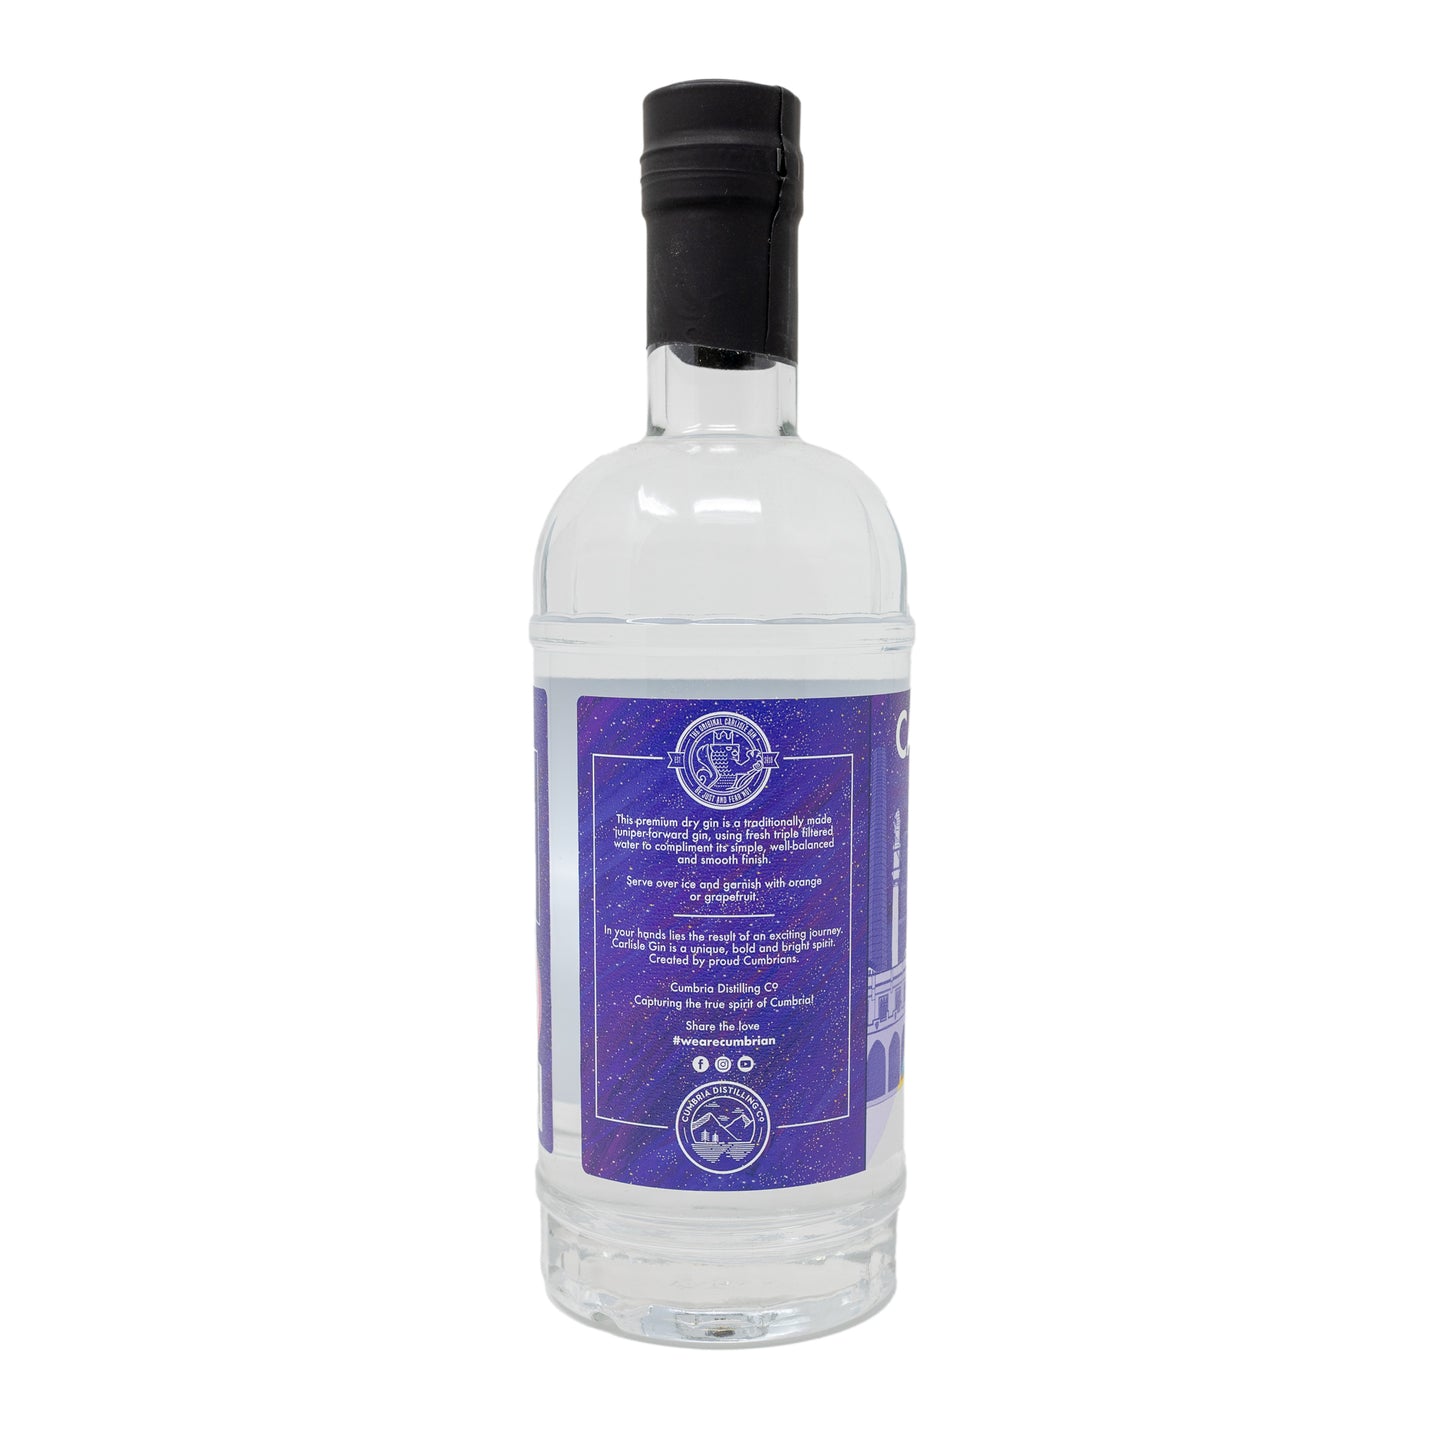 Cumbria Distilling Co Carlisle Gin - Handcrafted Dry Gin - 2 Sizes